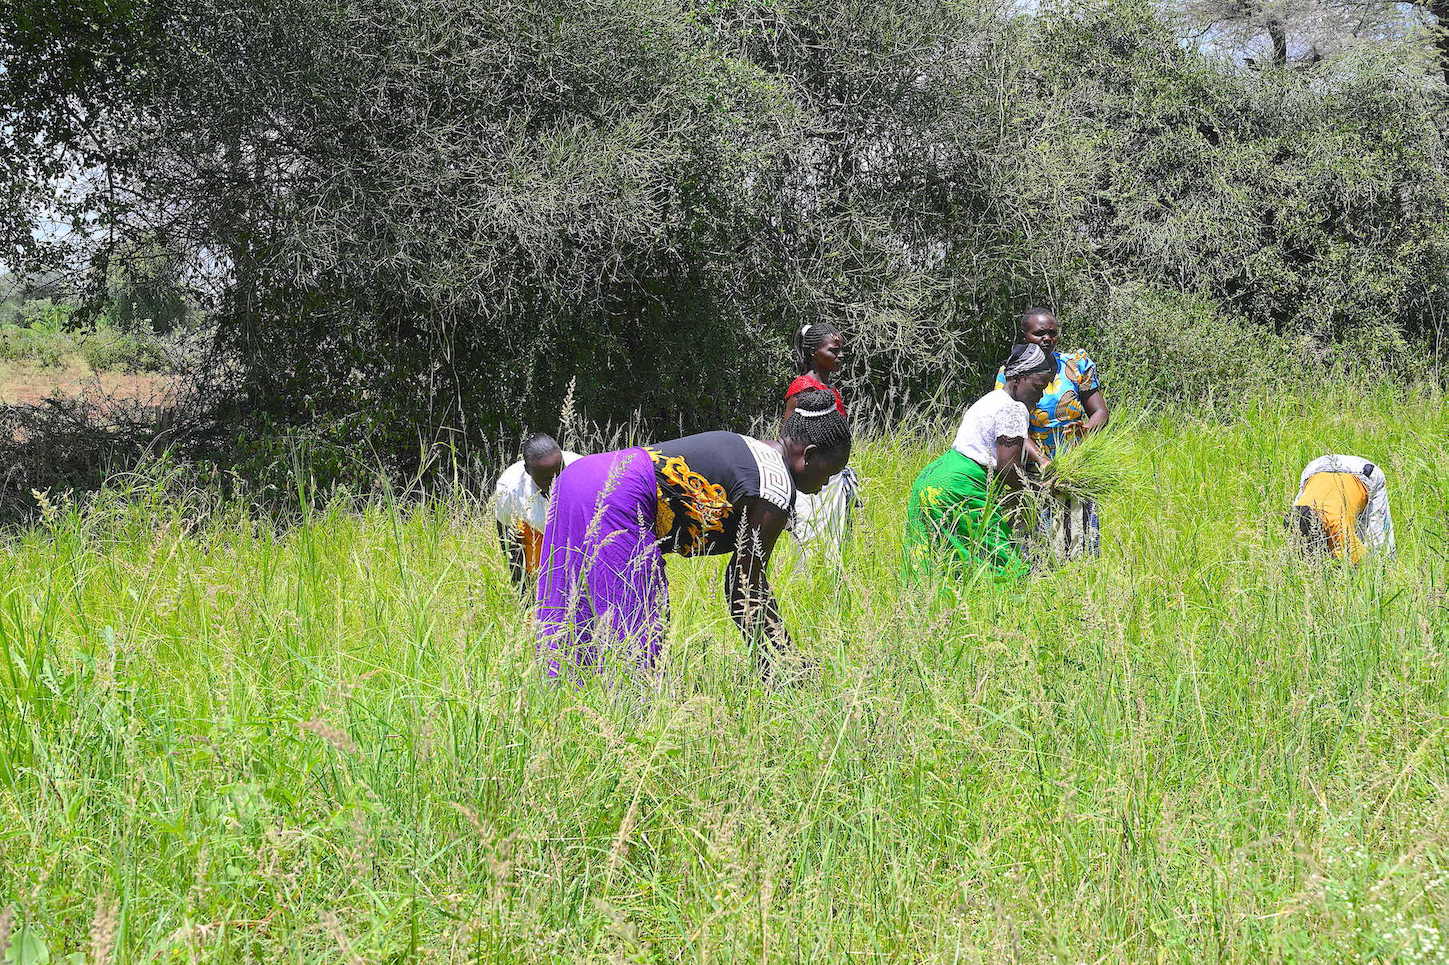 While searching for pasture in the forest, most women are usually vulnerable to attacks and abuse from cattle raiders.